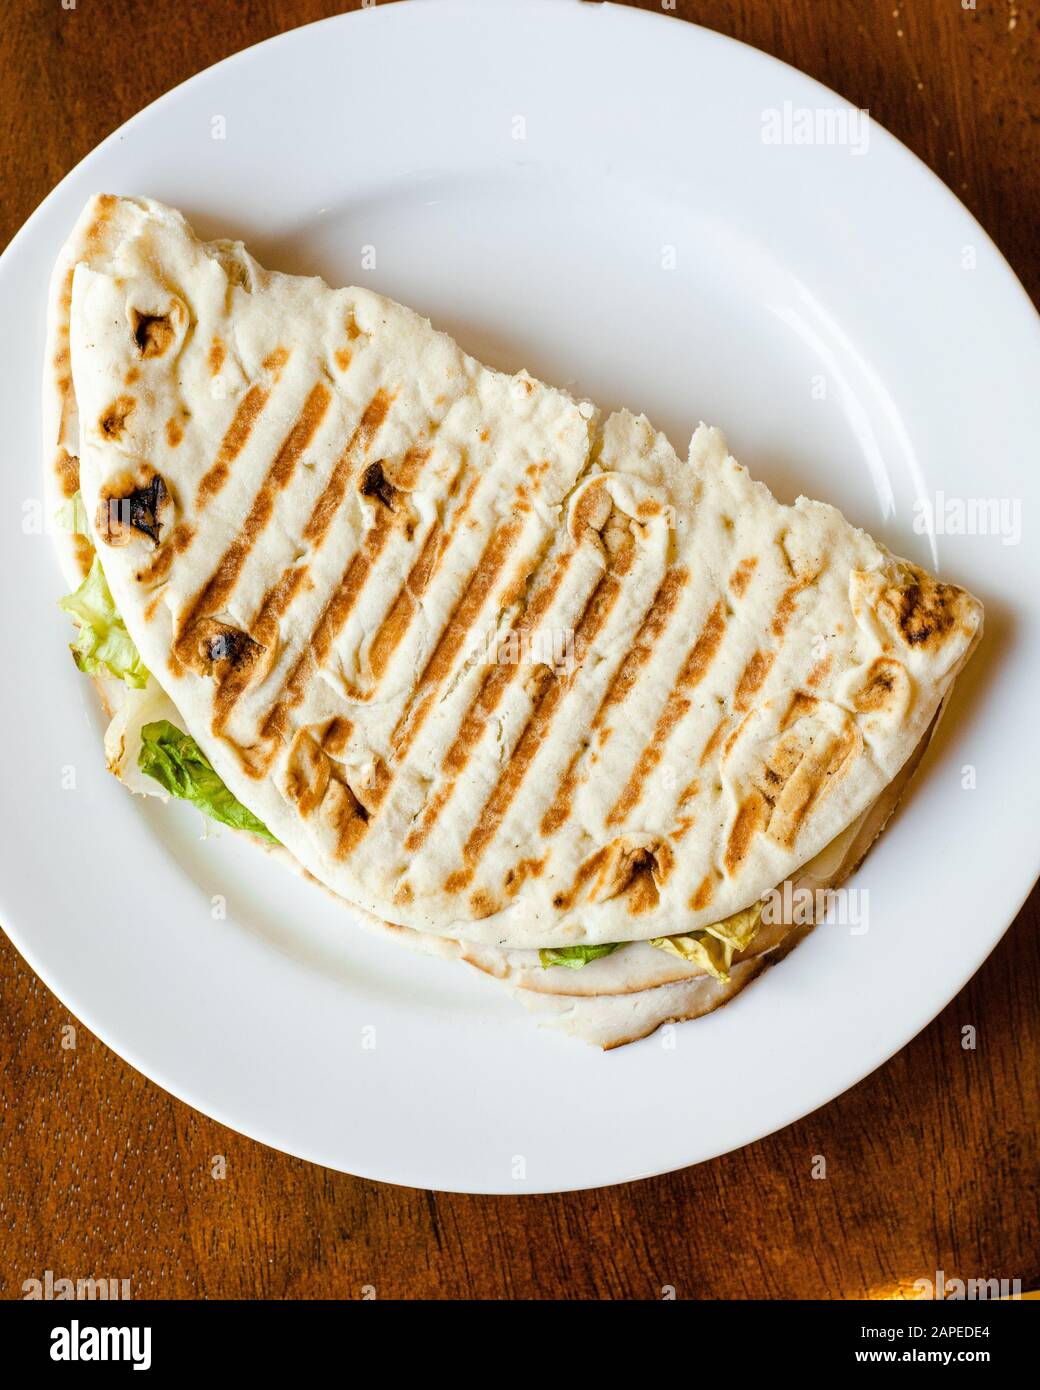 Flatbread Pita bread grilled panini sandwich folded in half with lettuce, turkey, melted cheese on a white plate top down Stock Photo